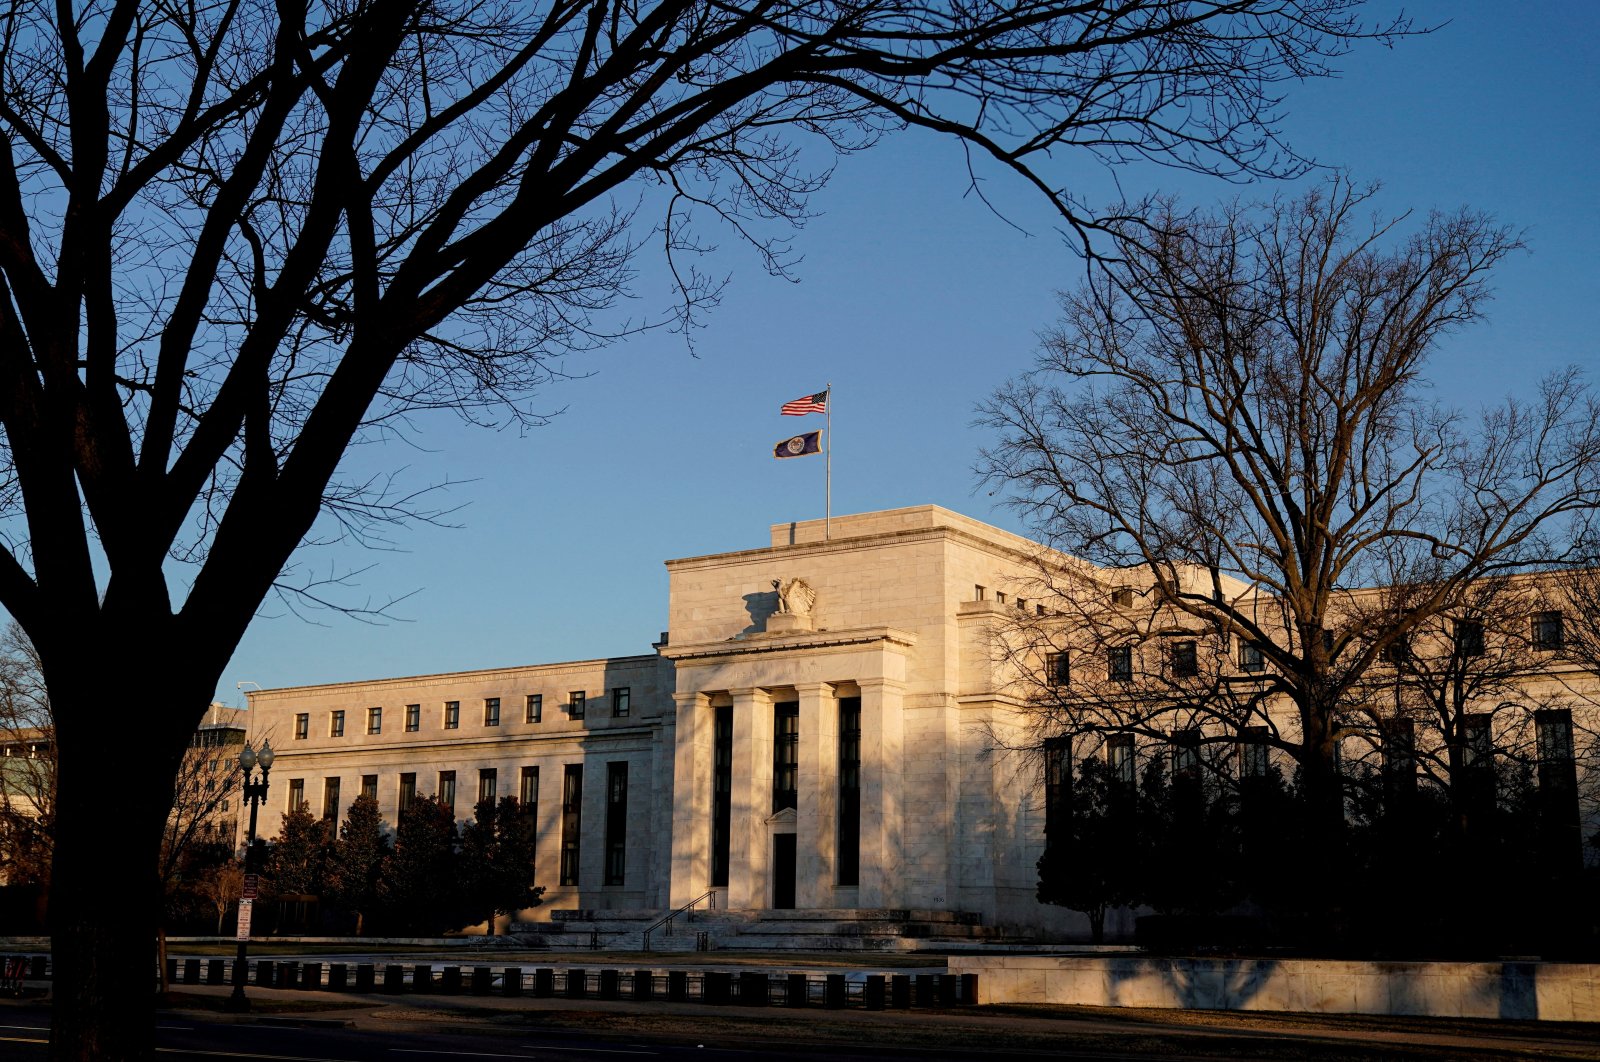 The Federal Reserve building is seen in Washington, U.S., Jan. 26, 2022. (Reuters Photo)